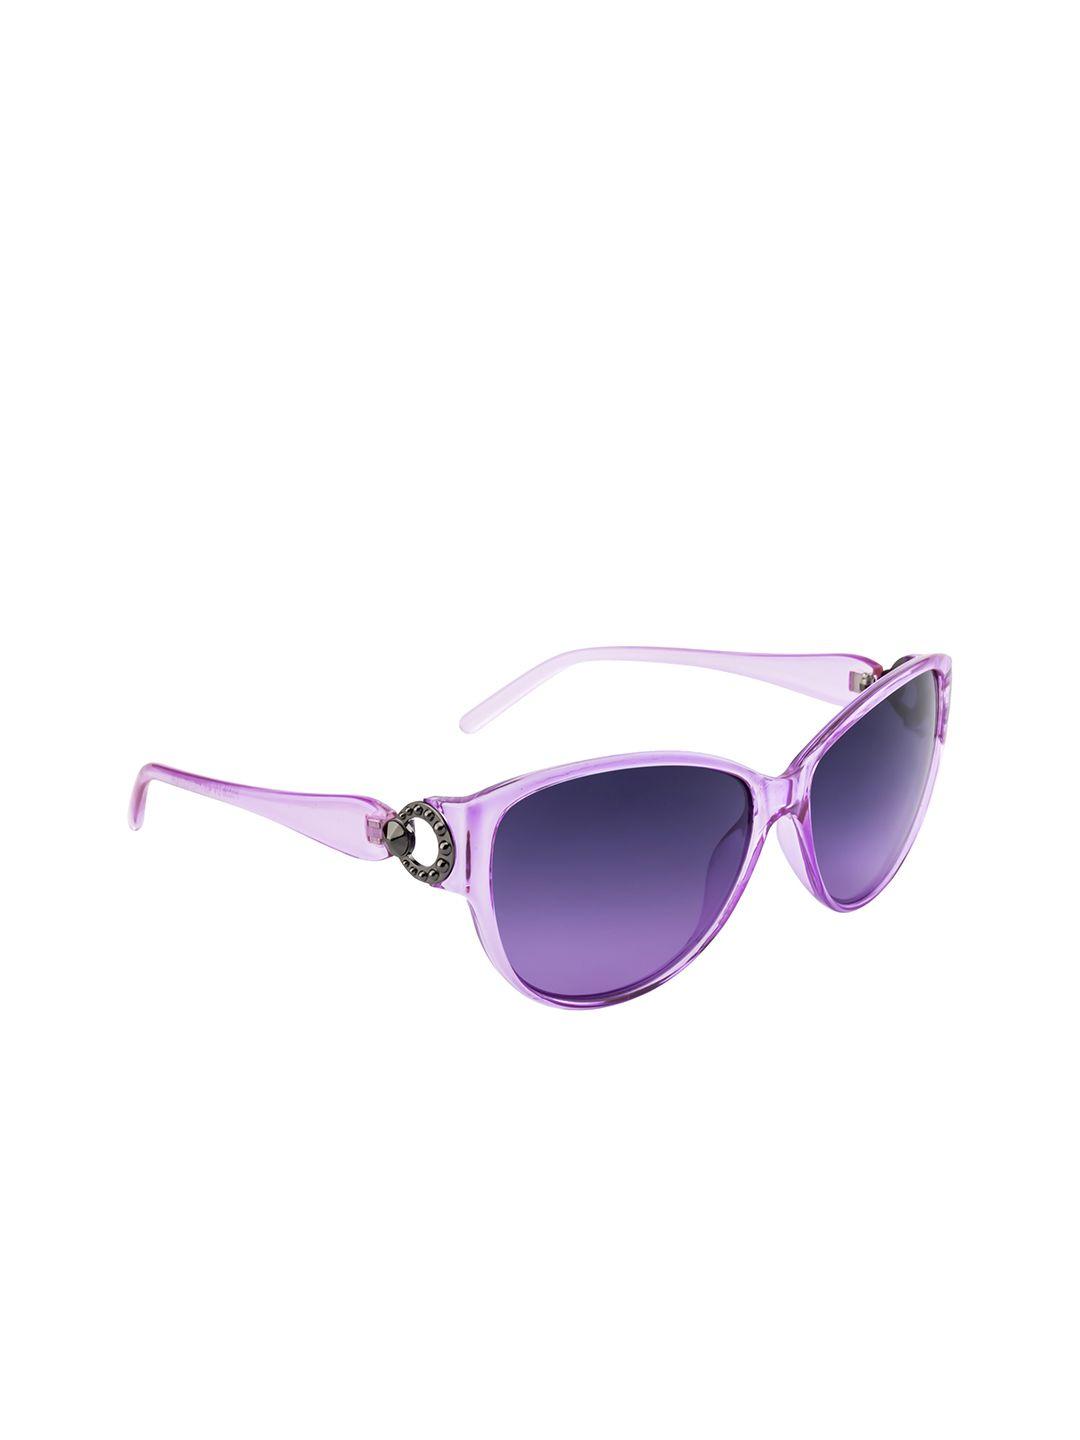 dressberry women purple cateye sunglasses with uv protected lens db-p8556-c8